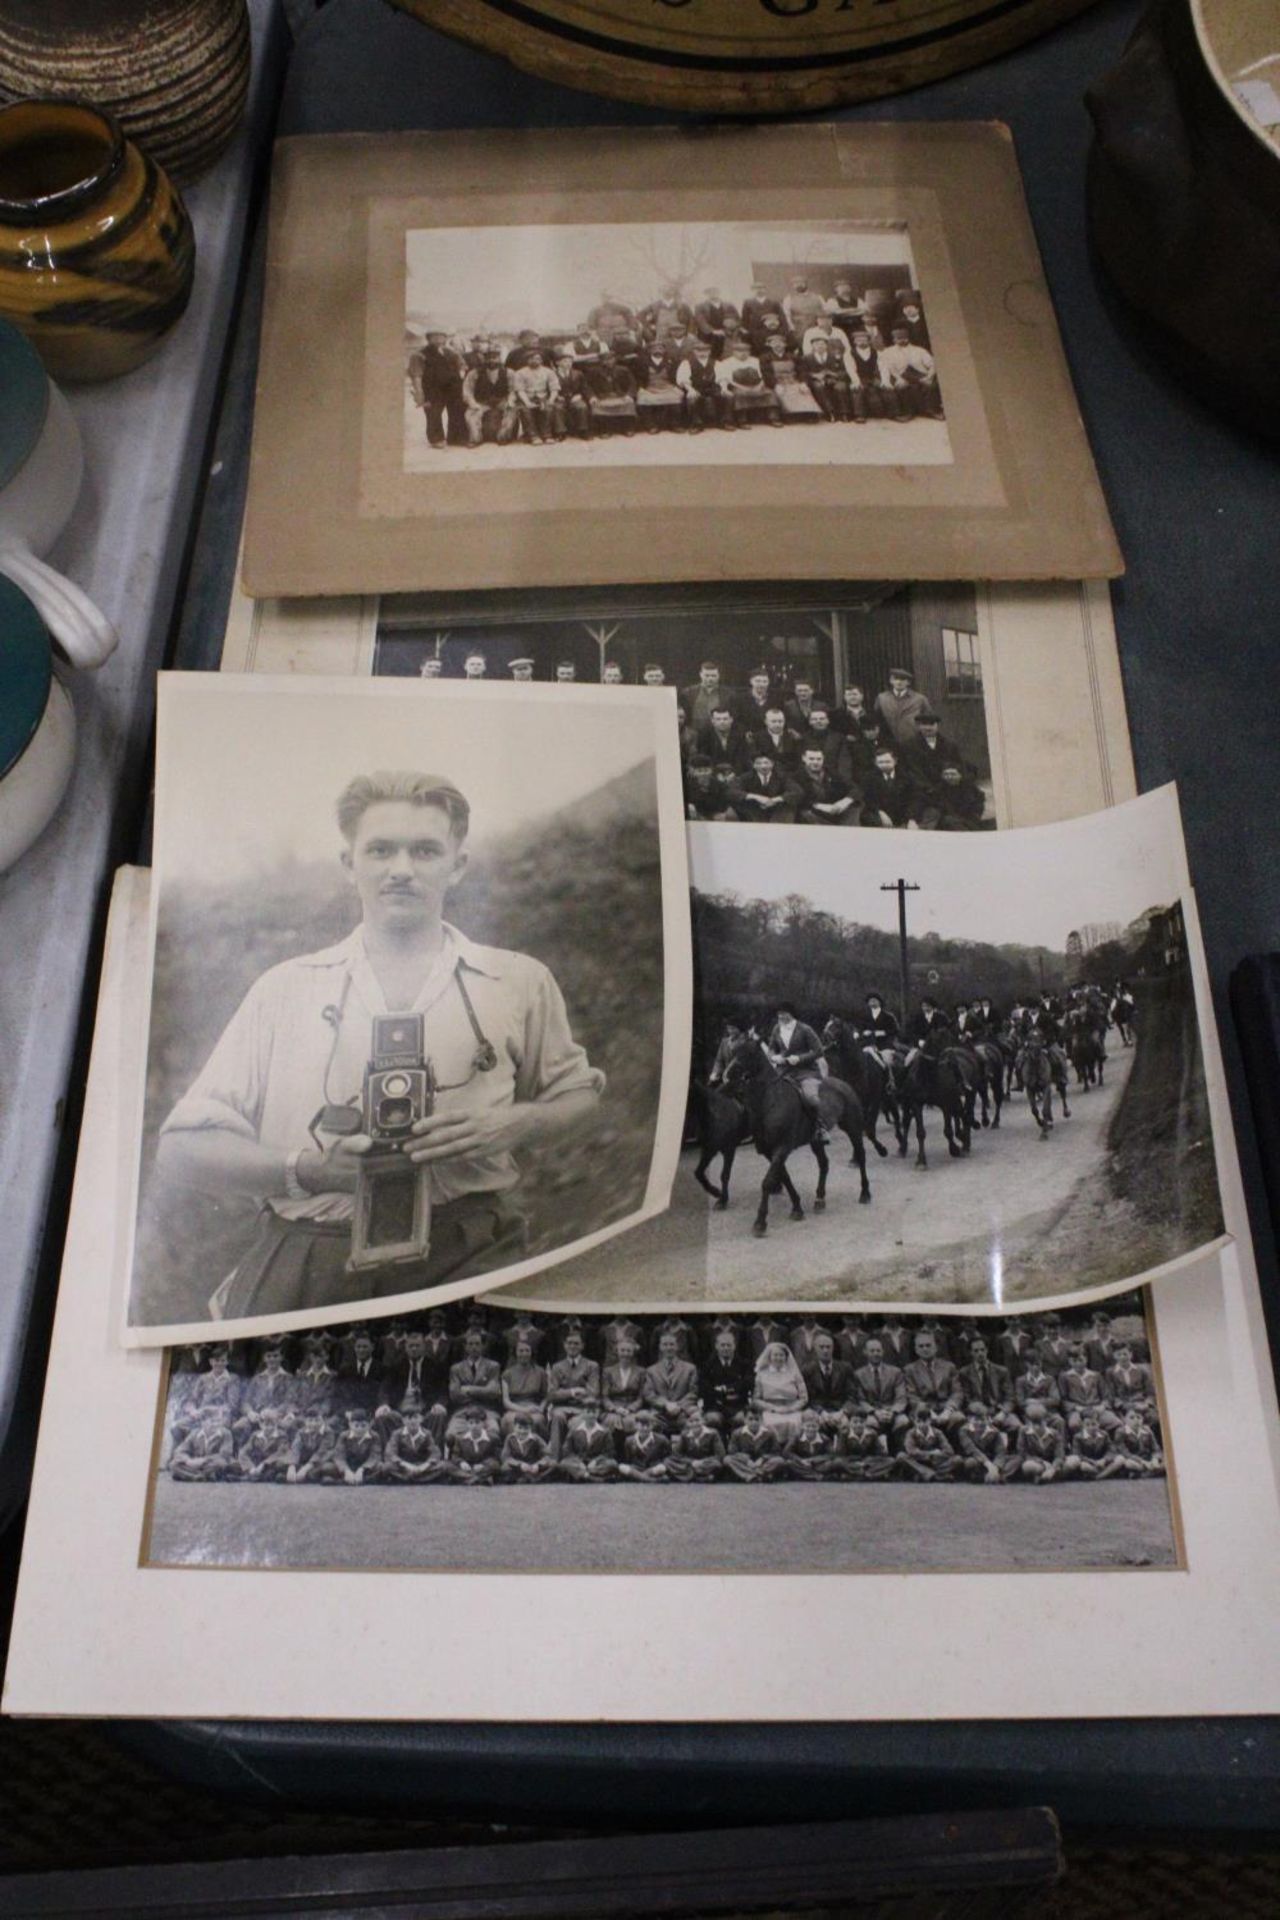 A COLLECTION OF VINTAGE PHOTOGRAPHS - FIVE IN TOTAL